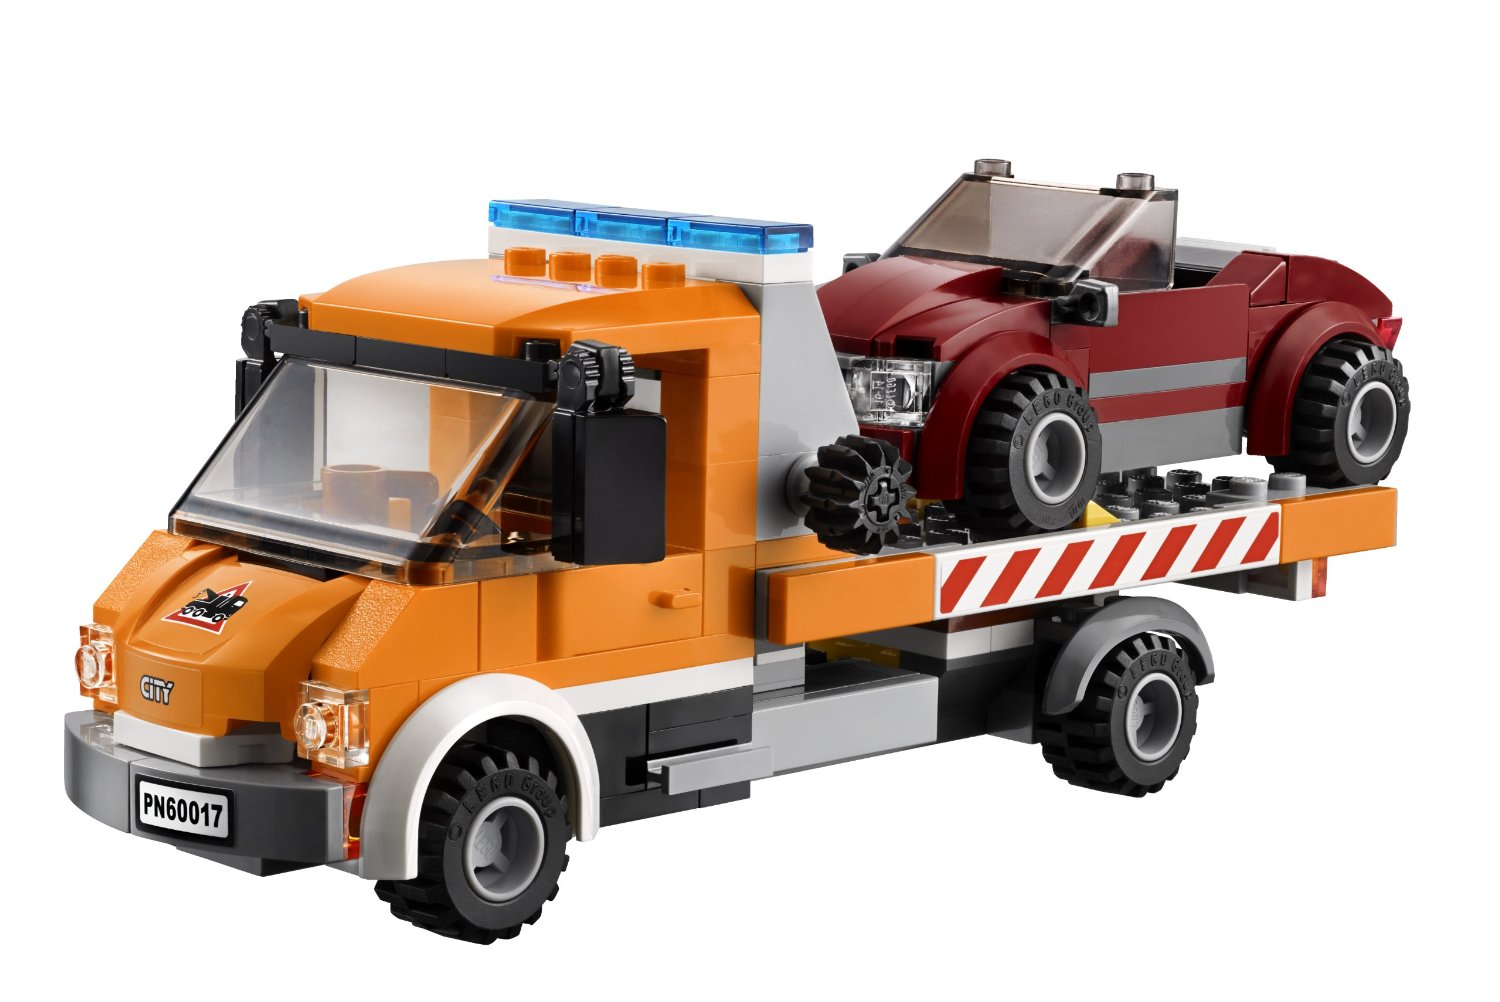 LEGO City Flatbed Truck 33% off!